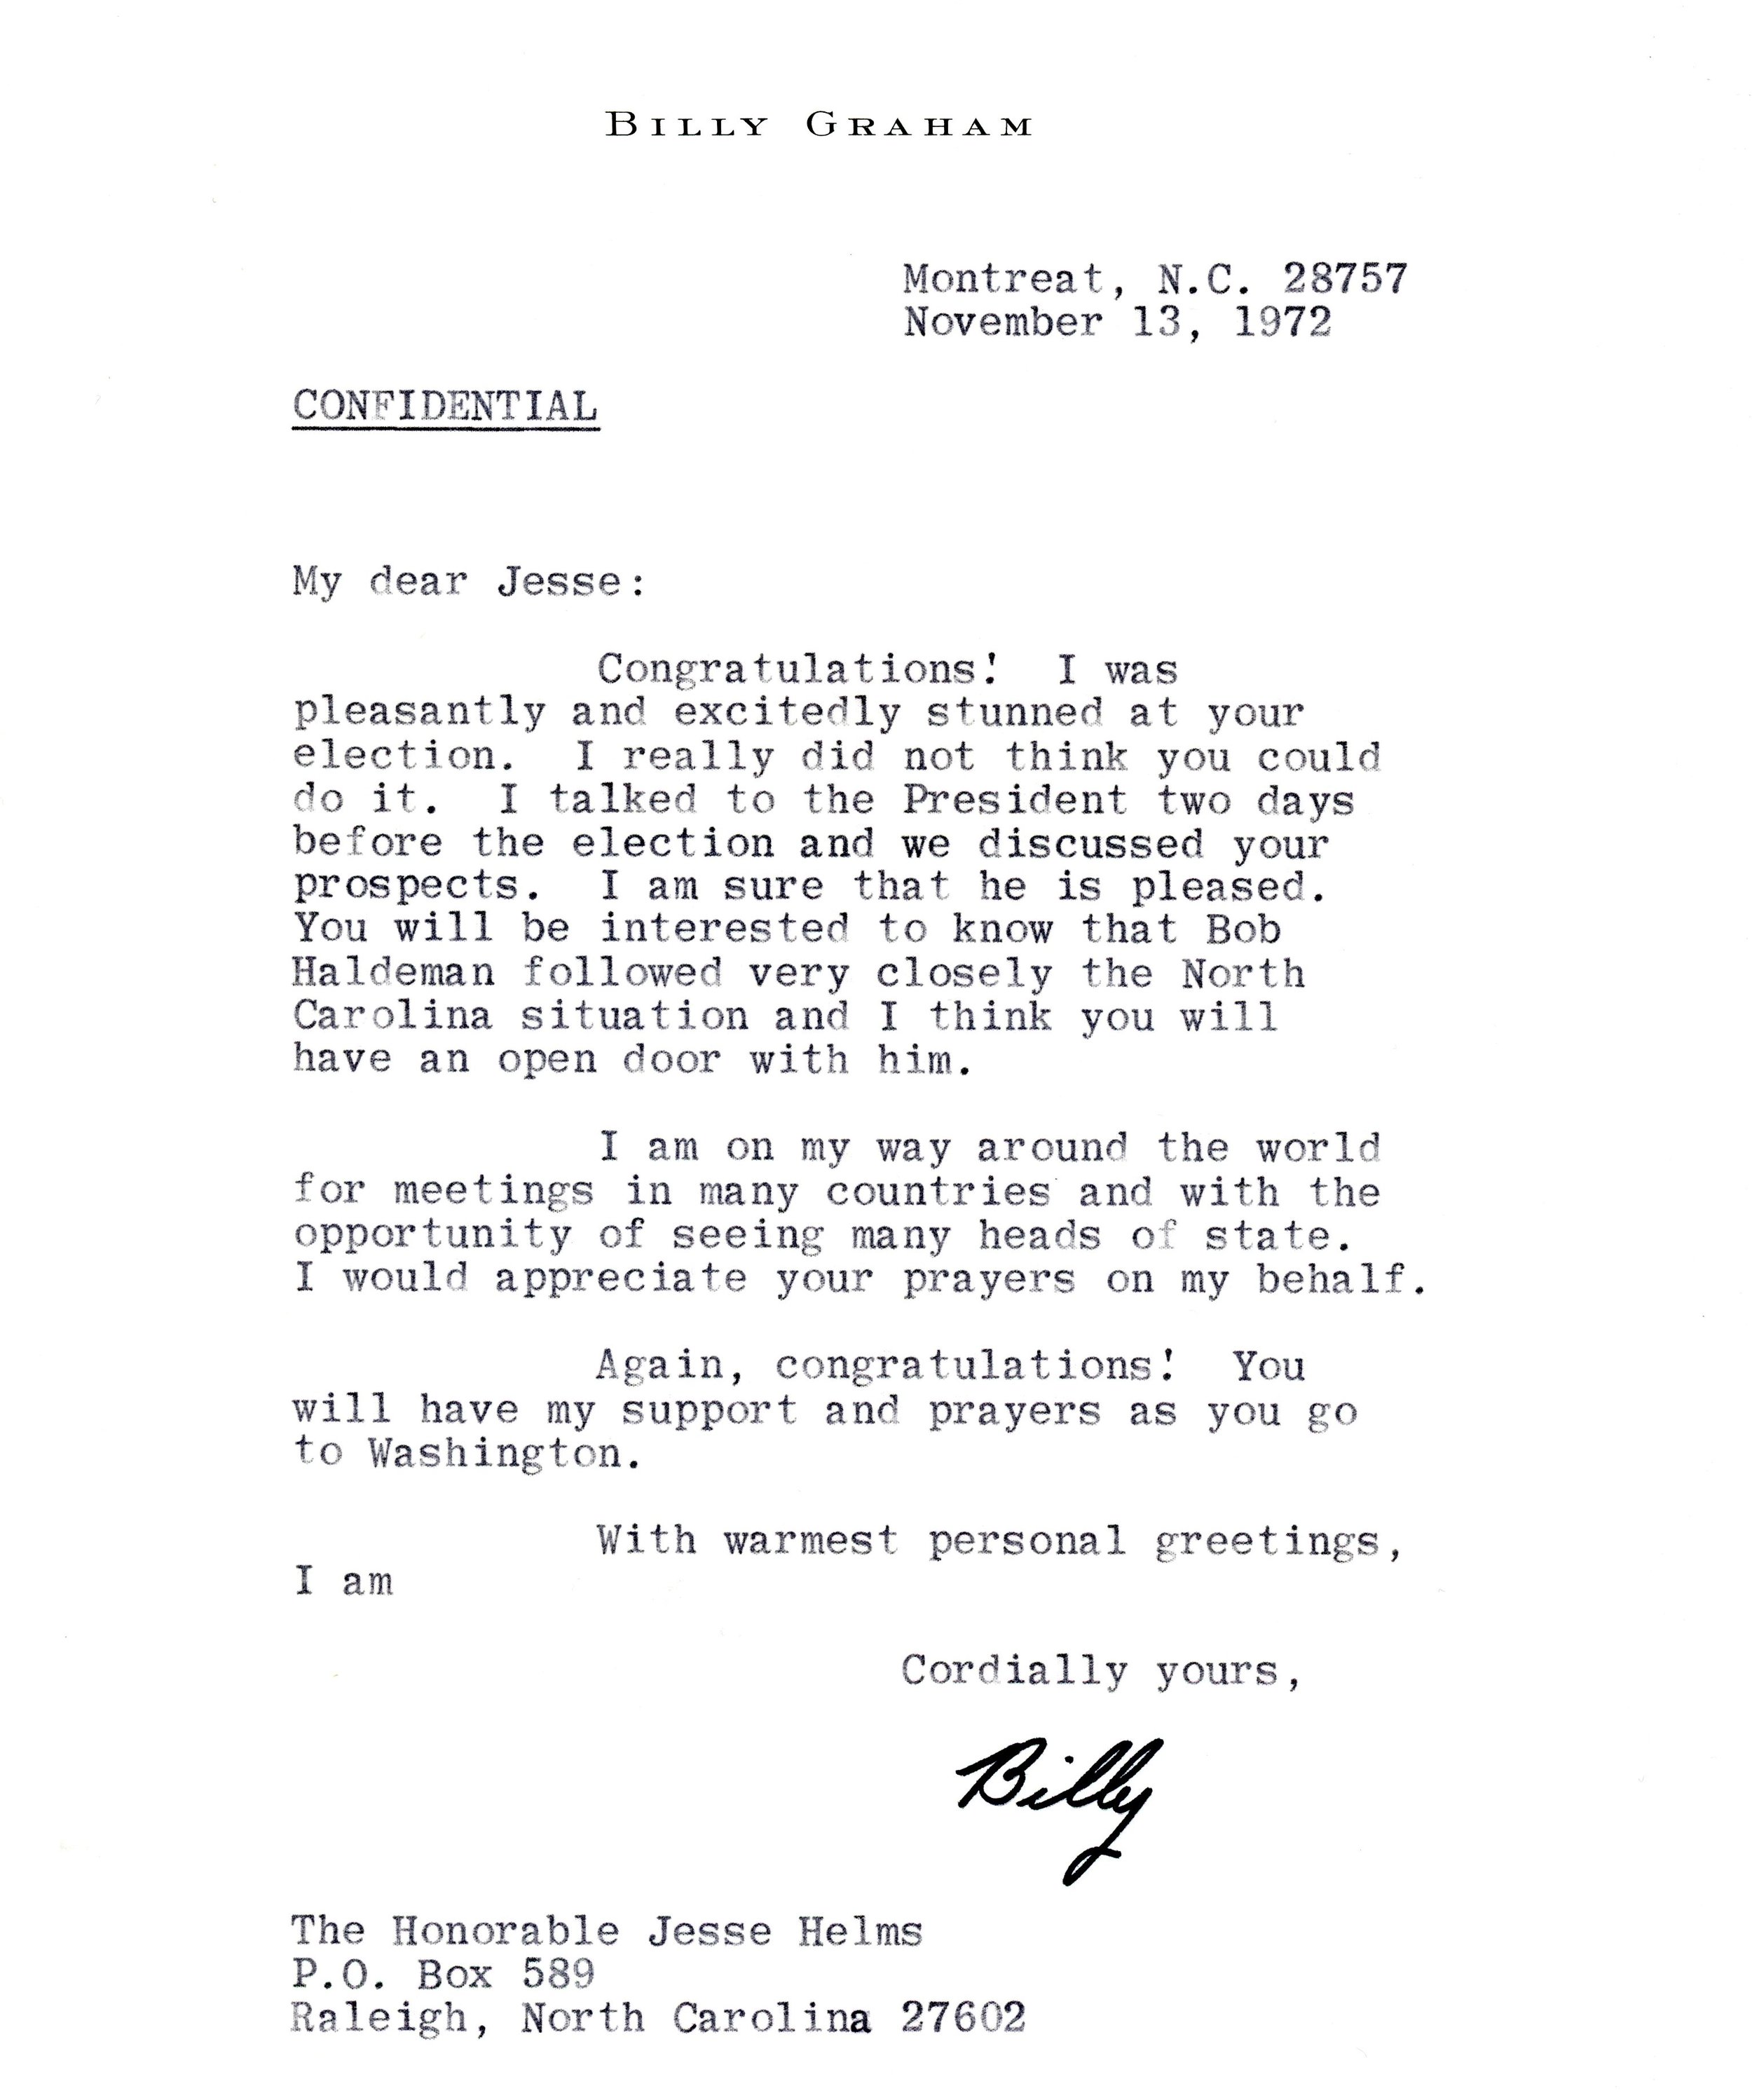 Letter of congratulations to newly elected Senator Jesse Helms from Billy Graham.